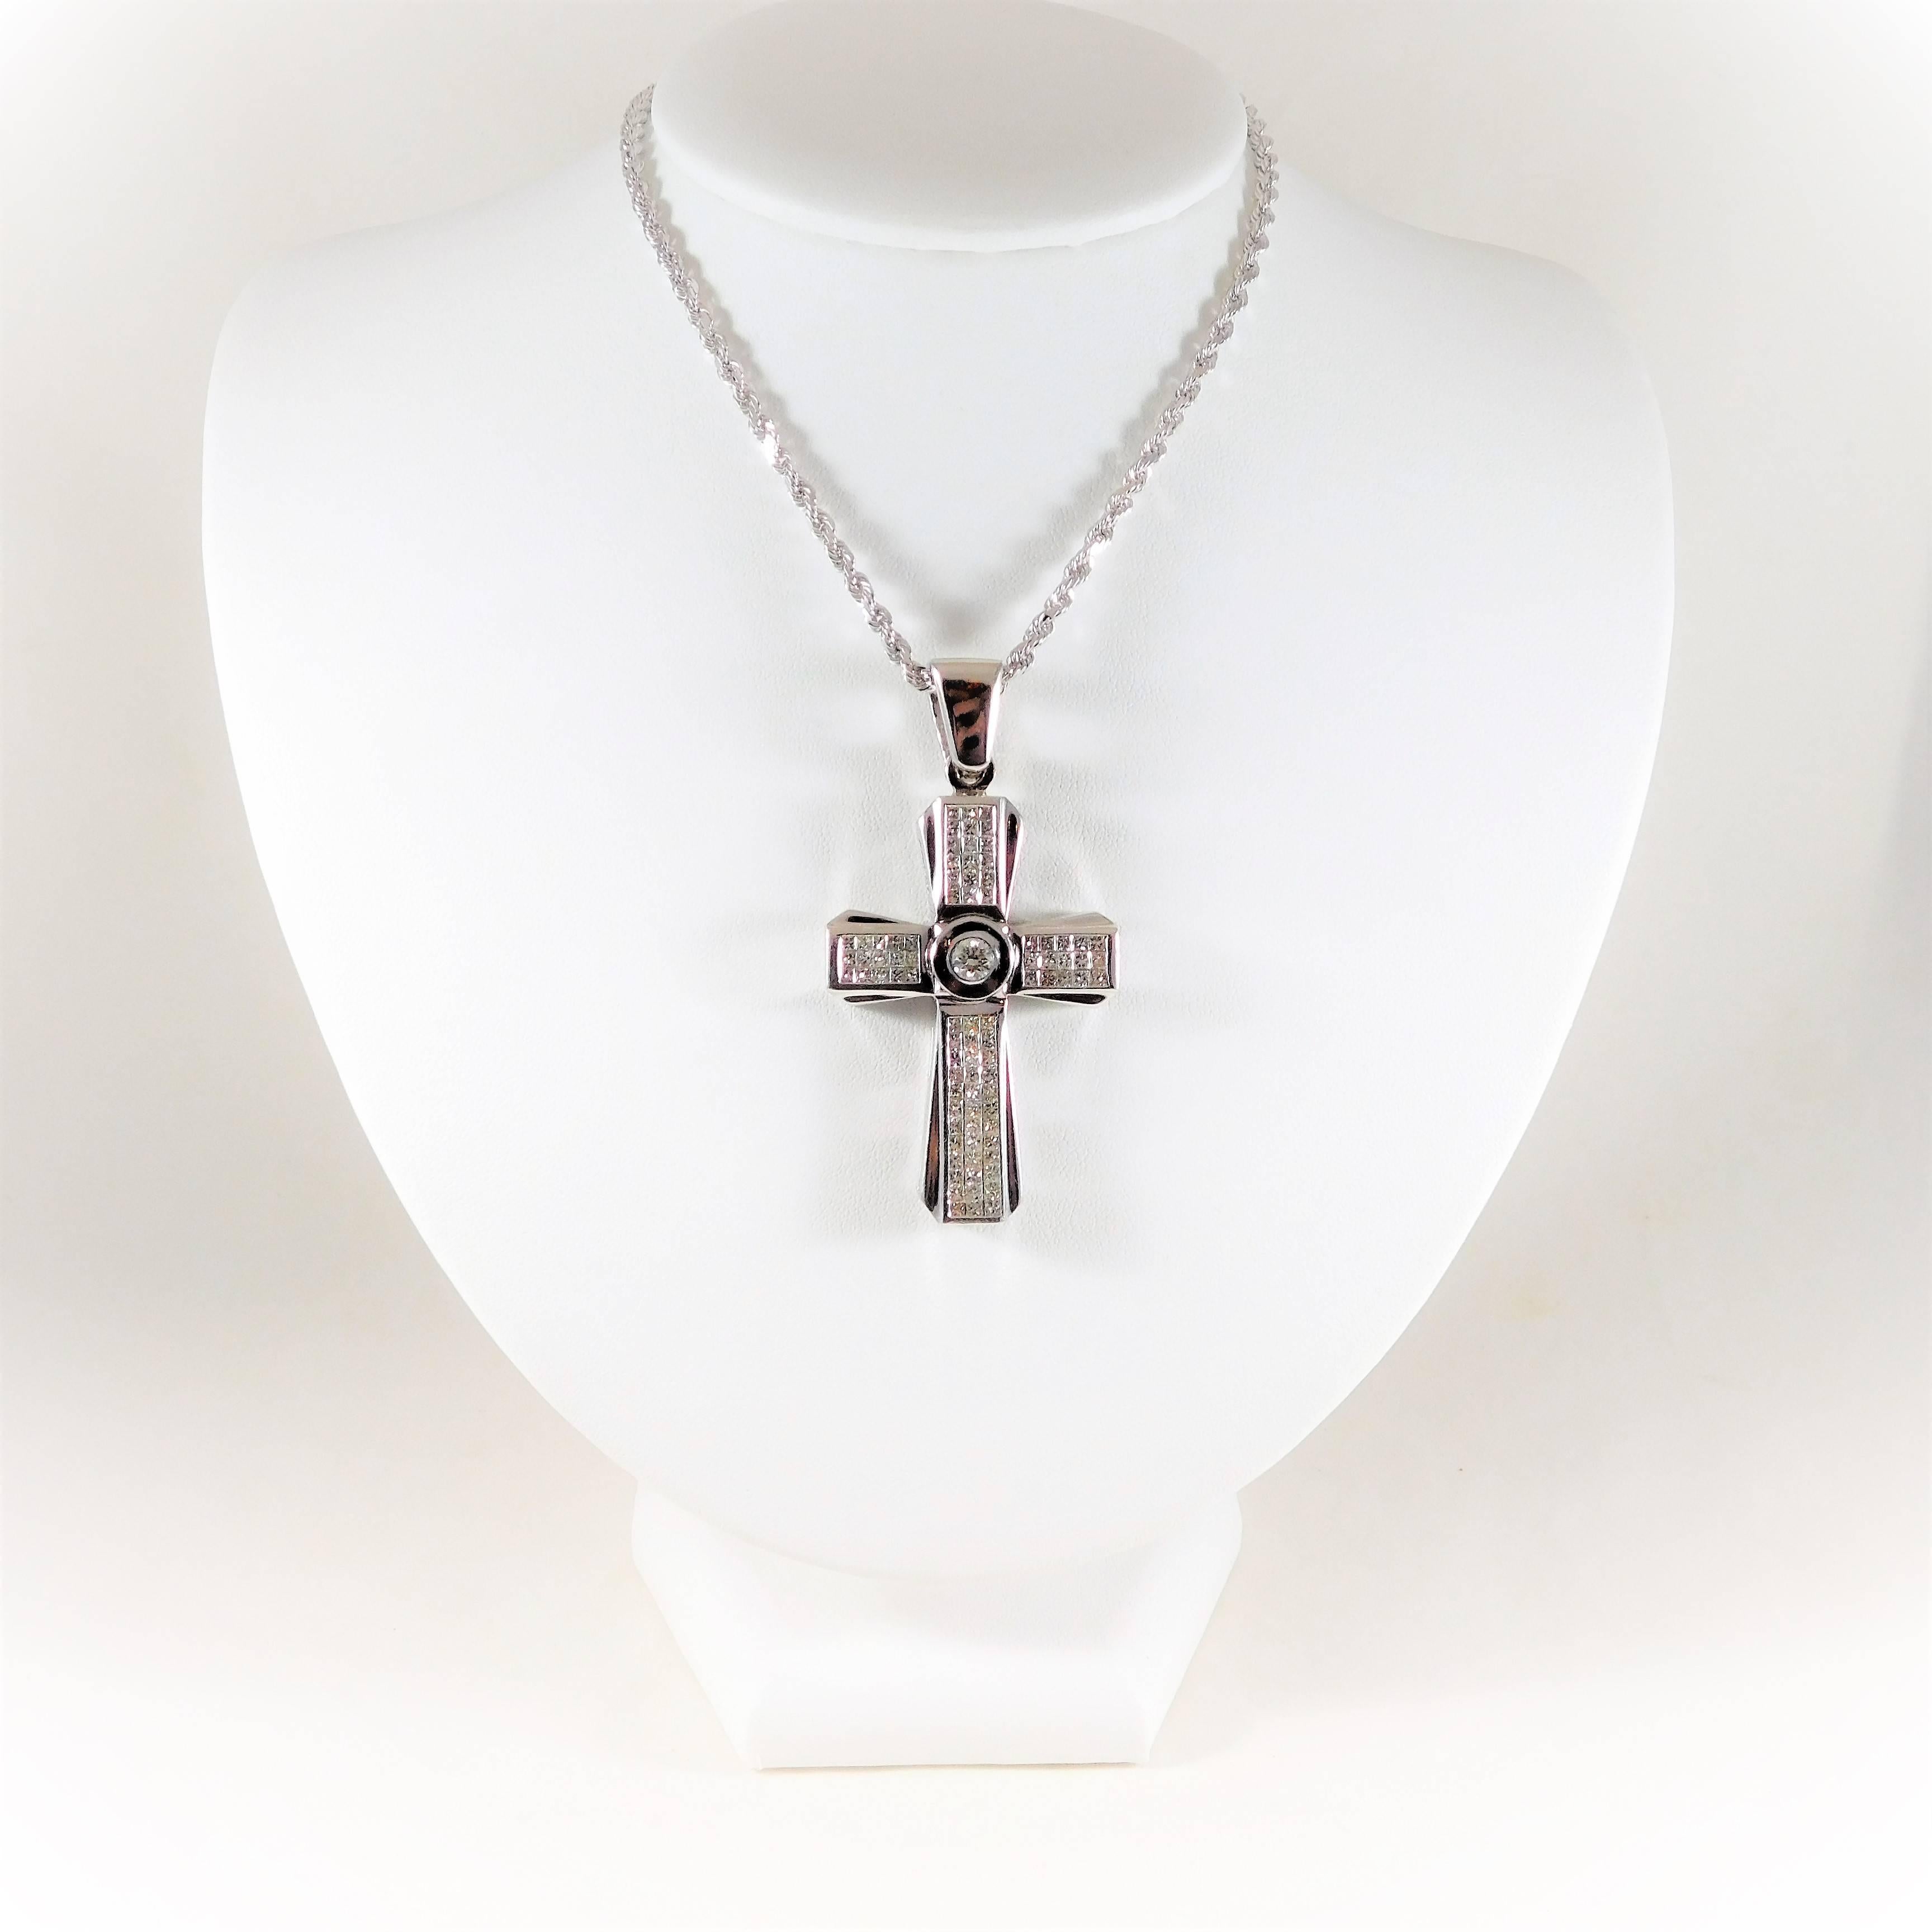  4.70 Carat Diamond White Gold Gothic Cross Pendant In Excellent Condition For Sale In Metairie, LA